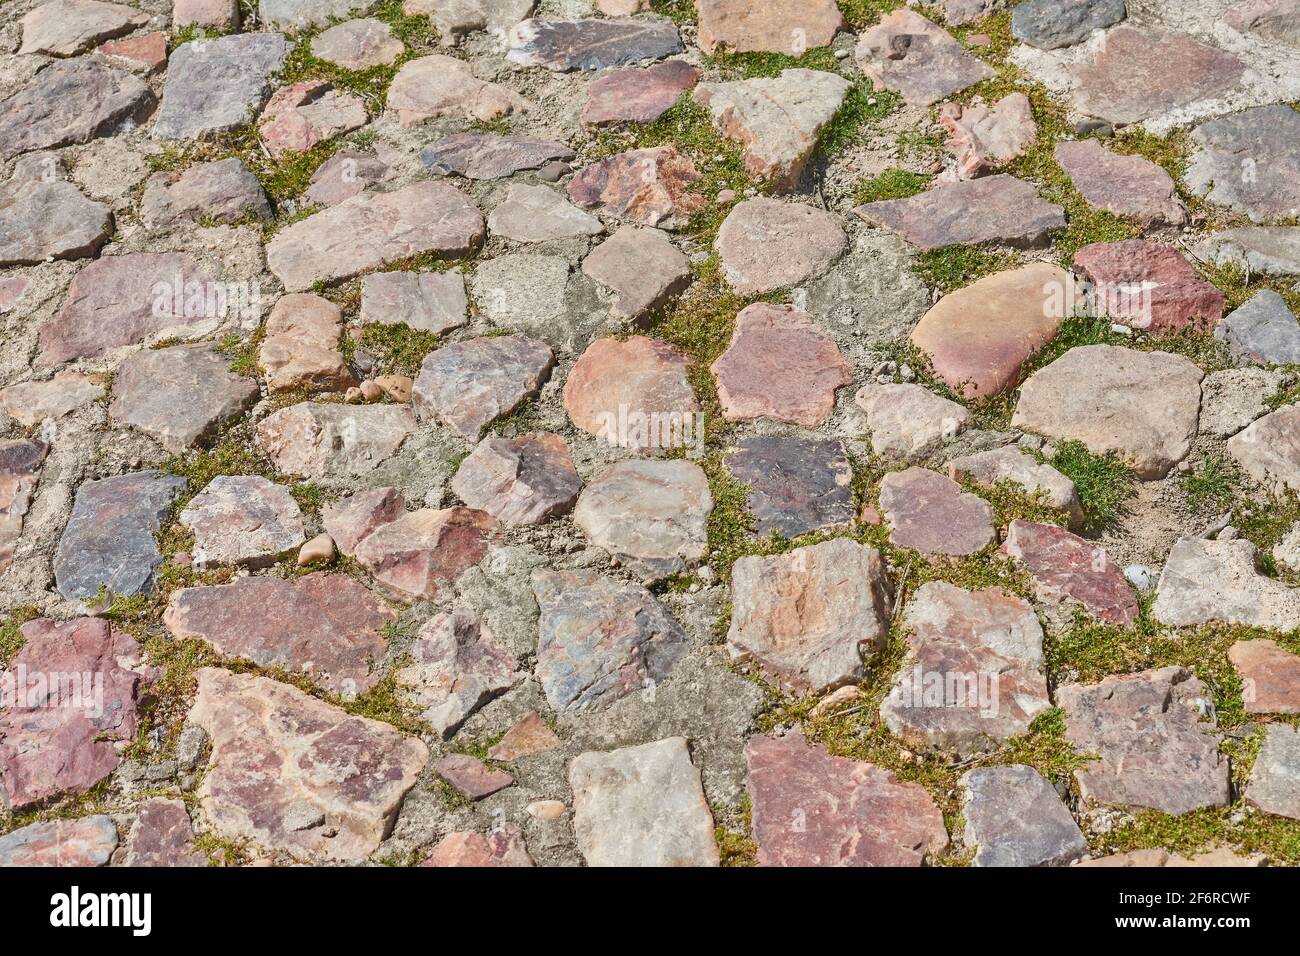 Stone pavement on a Roman road located in southwestern Spain Stock Photo